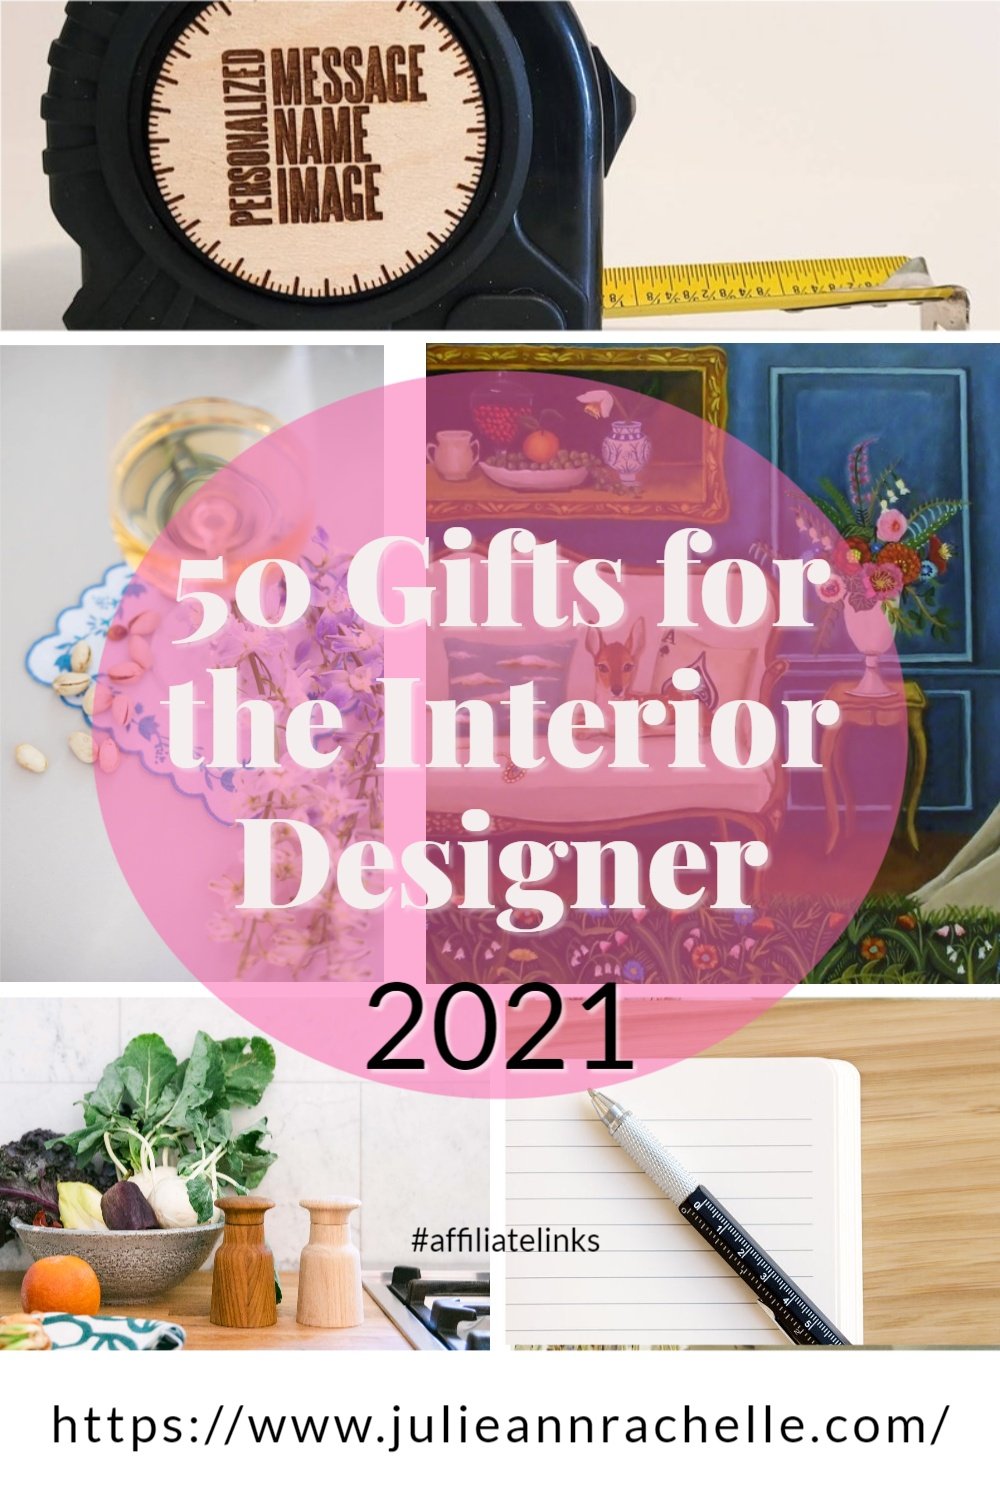 The Ultimate Gift Guide With Over 50 Ideas For Interior Designers